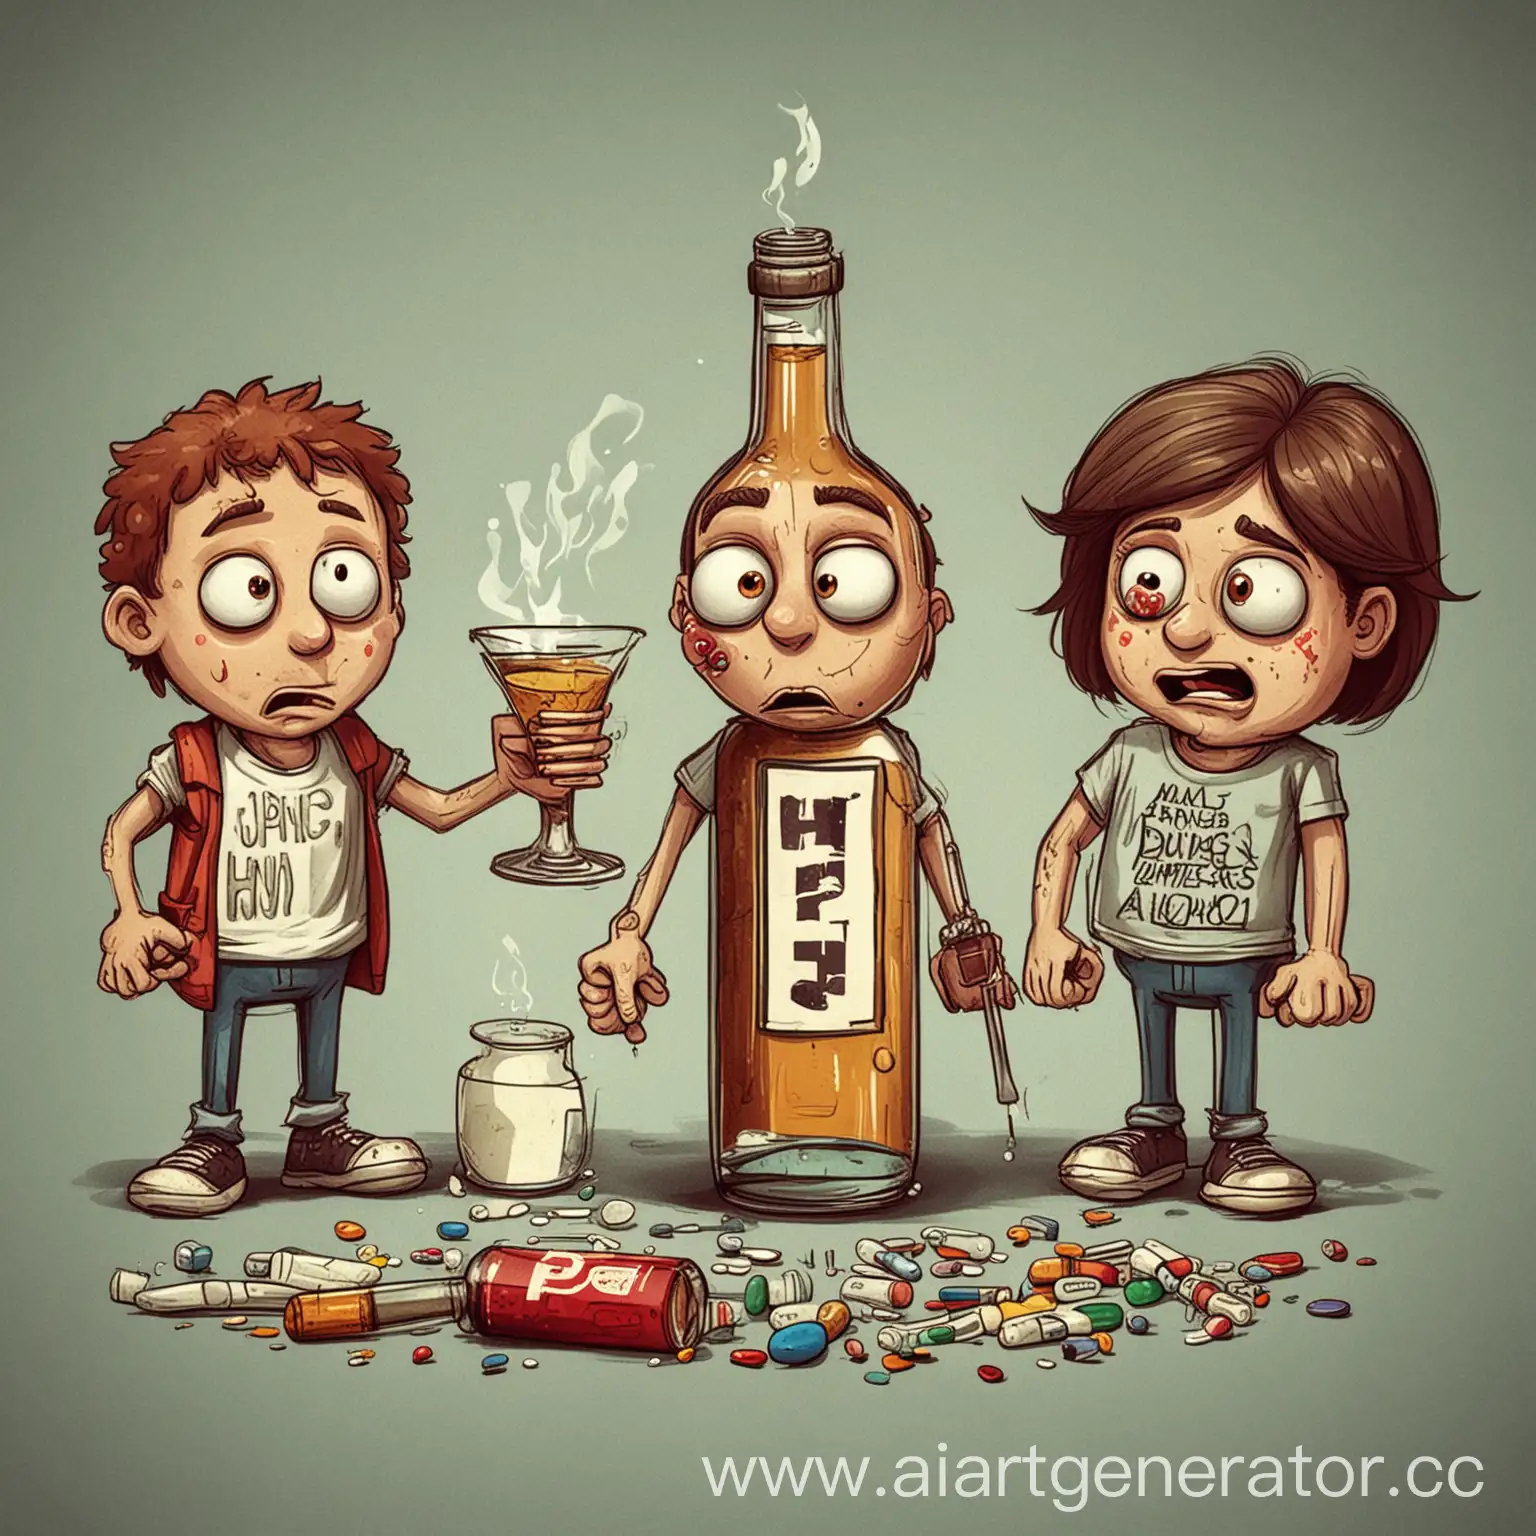 Colorful-Cartoon-Characters-Enjoying-Psychedelic-Drugs-and-Alcohol